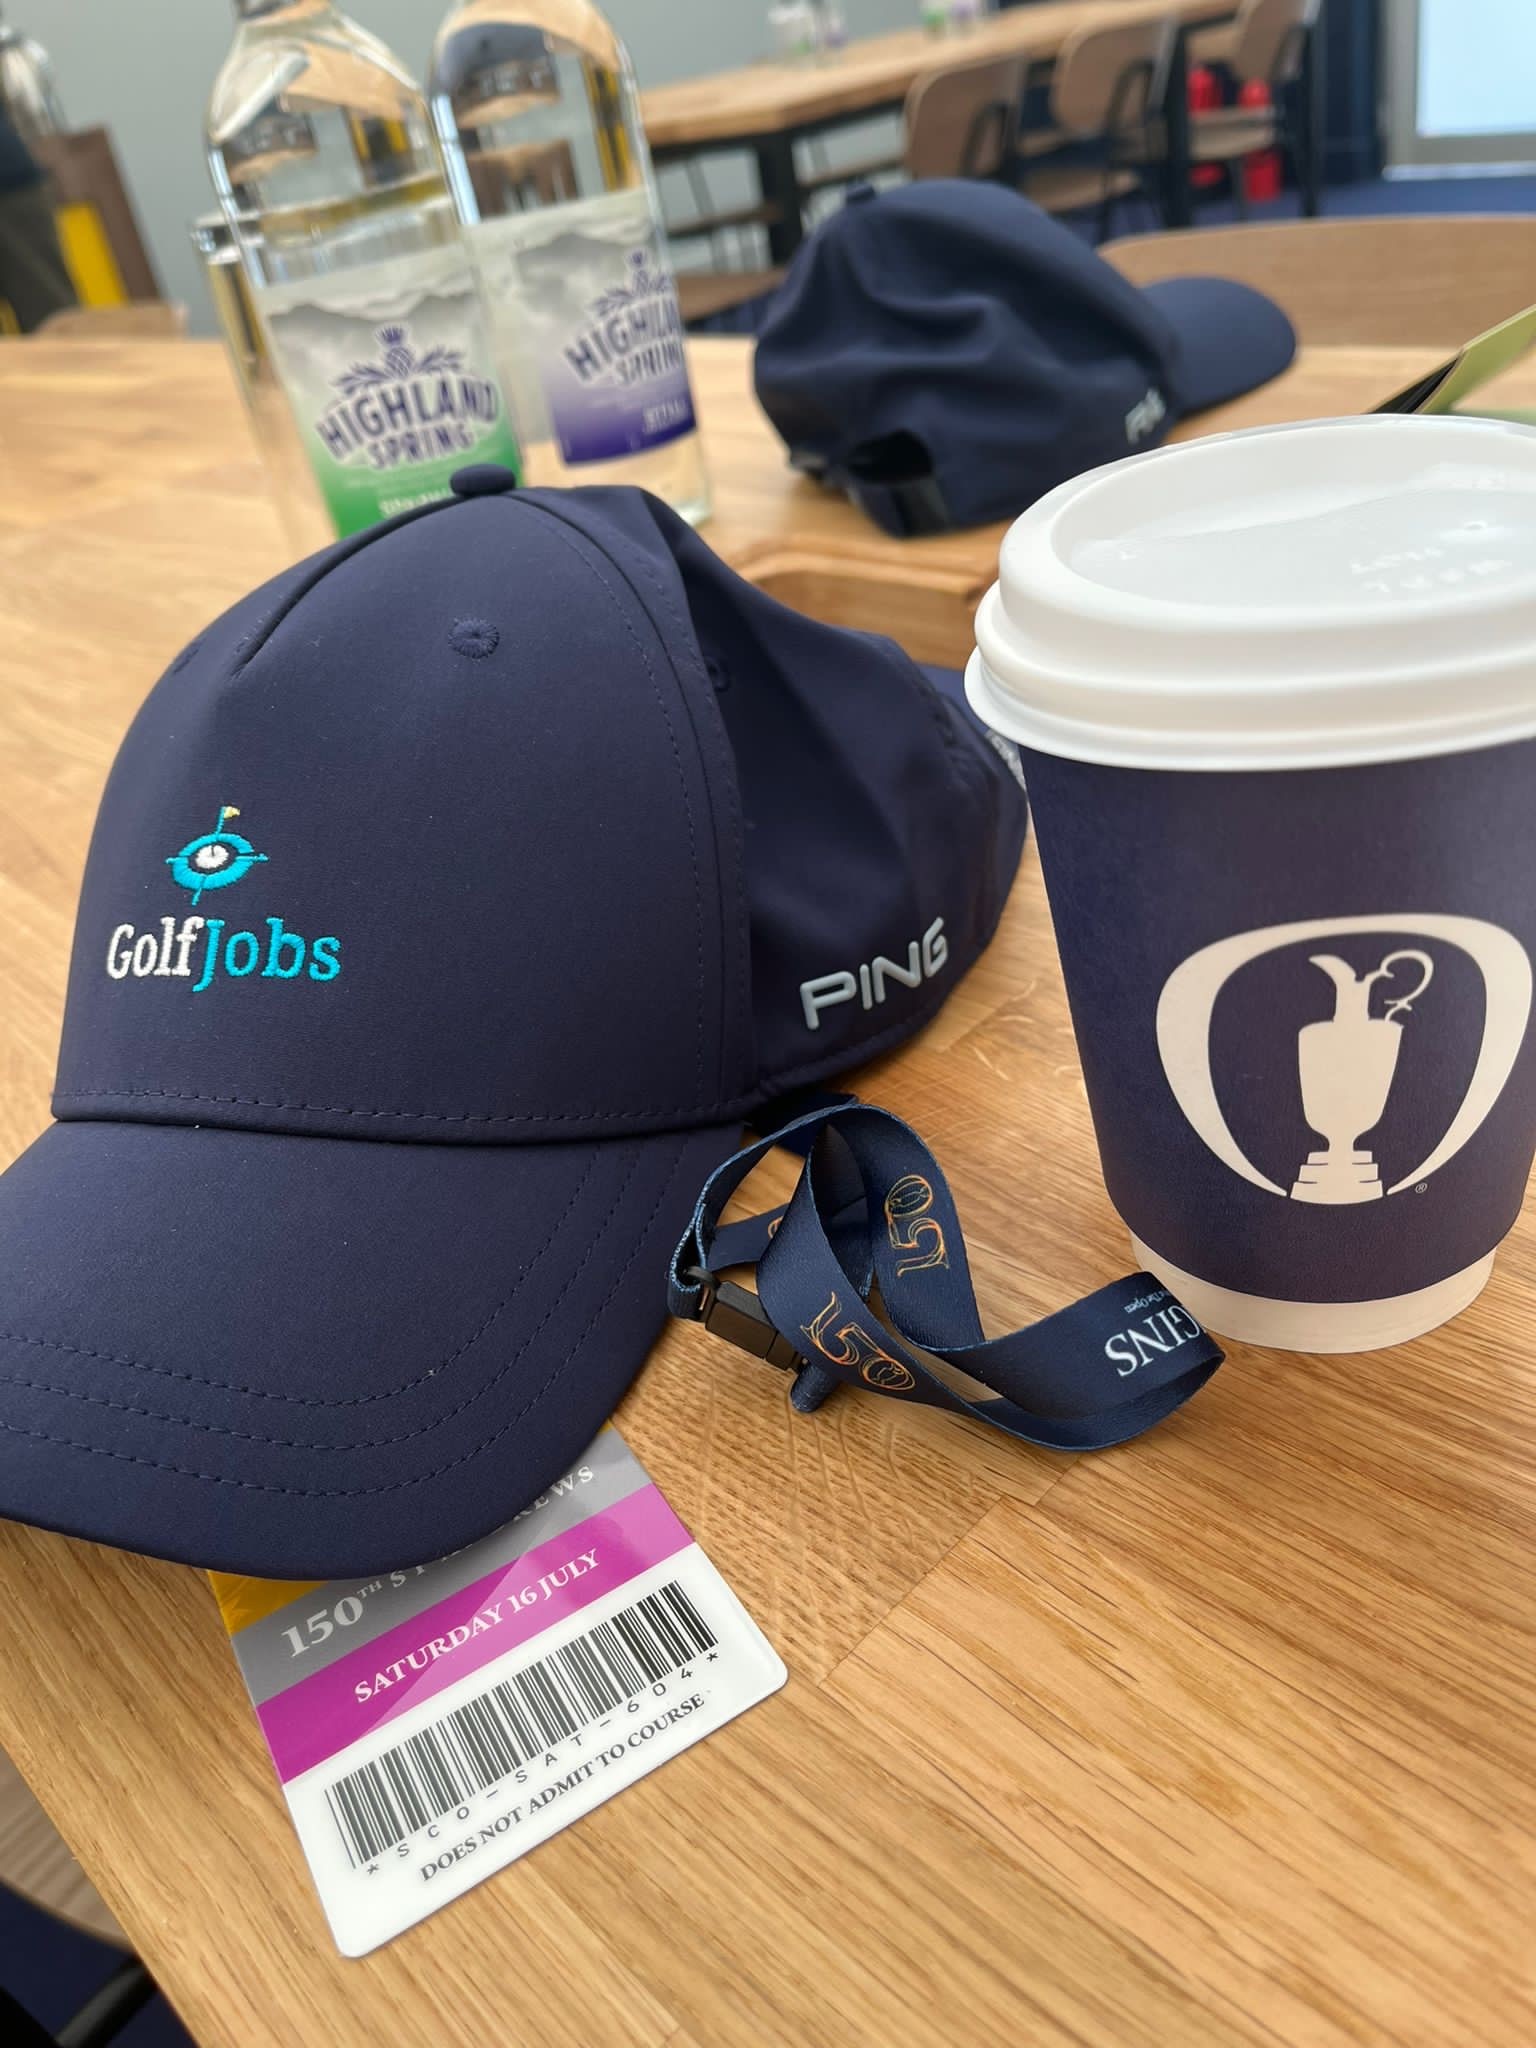 Golf Jobs at The 150th Open